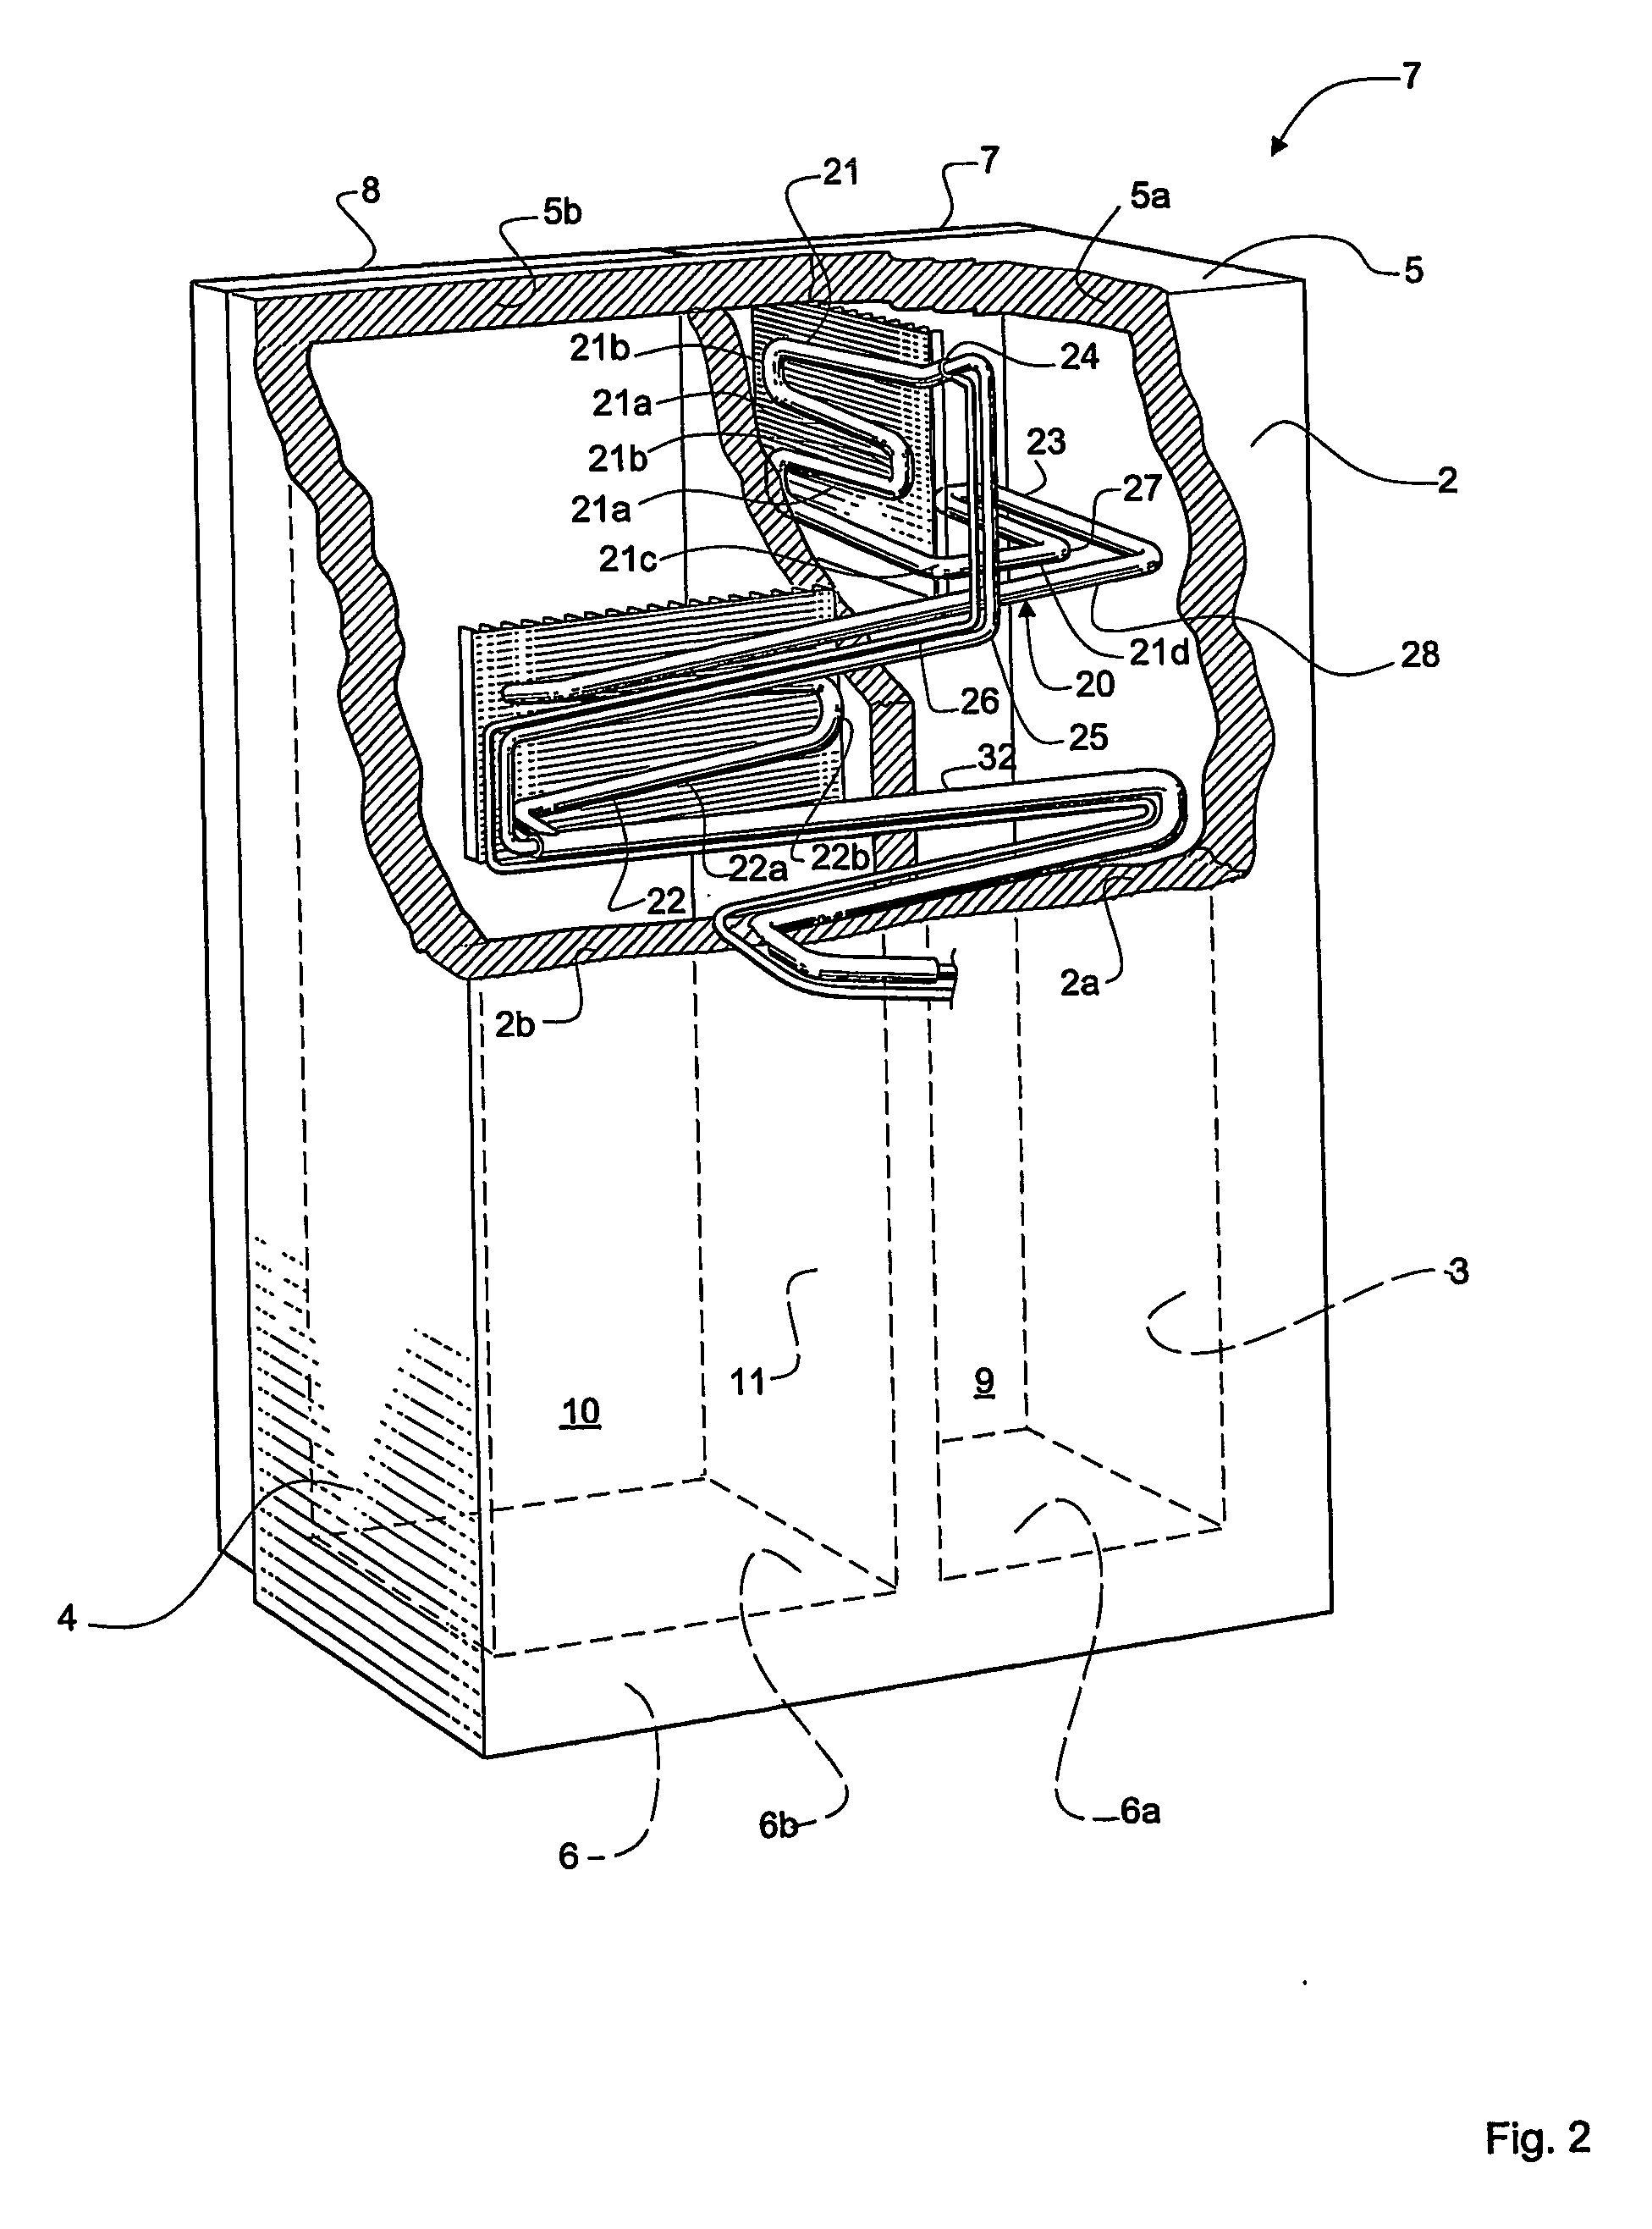 Absorption refrigerator with ice-maker